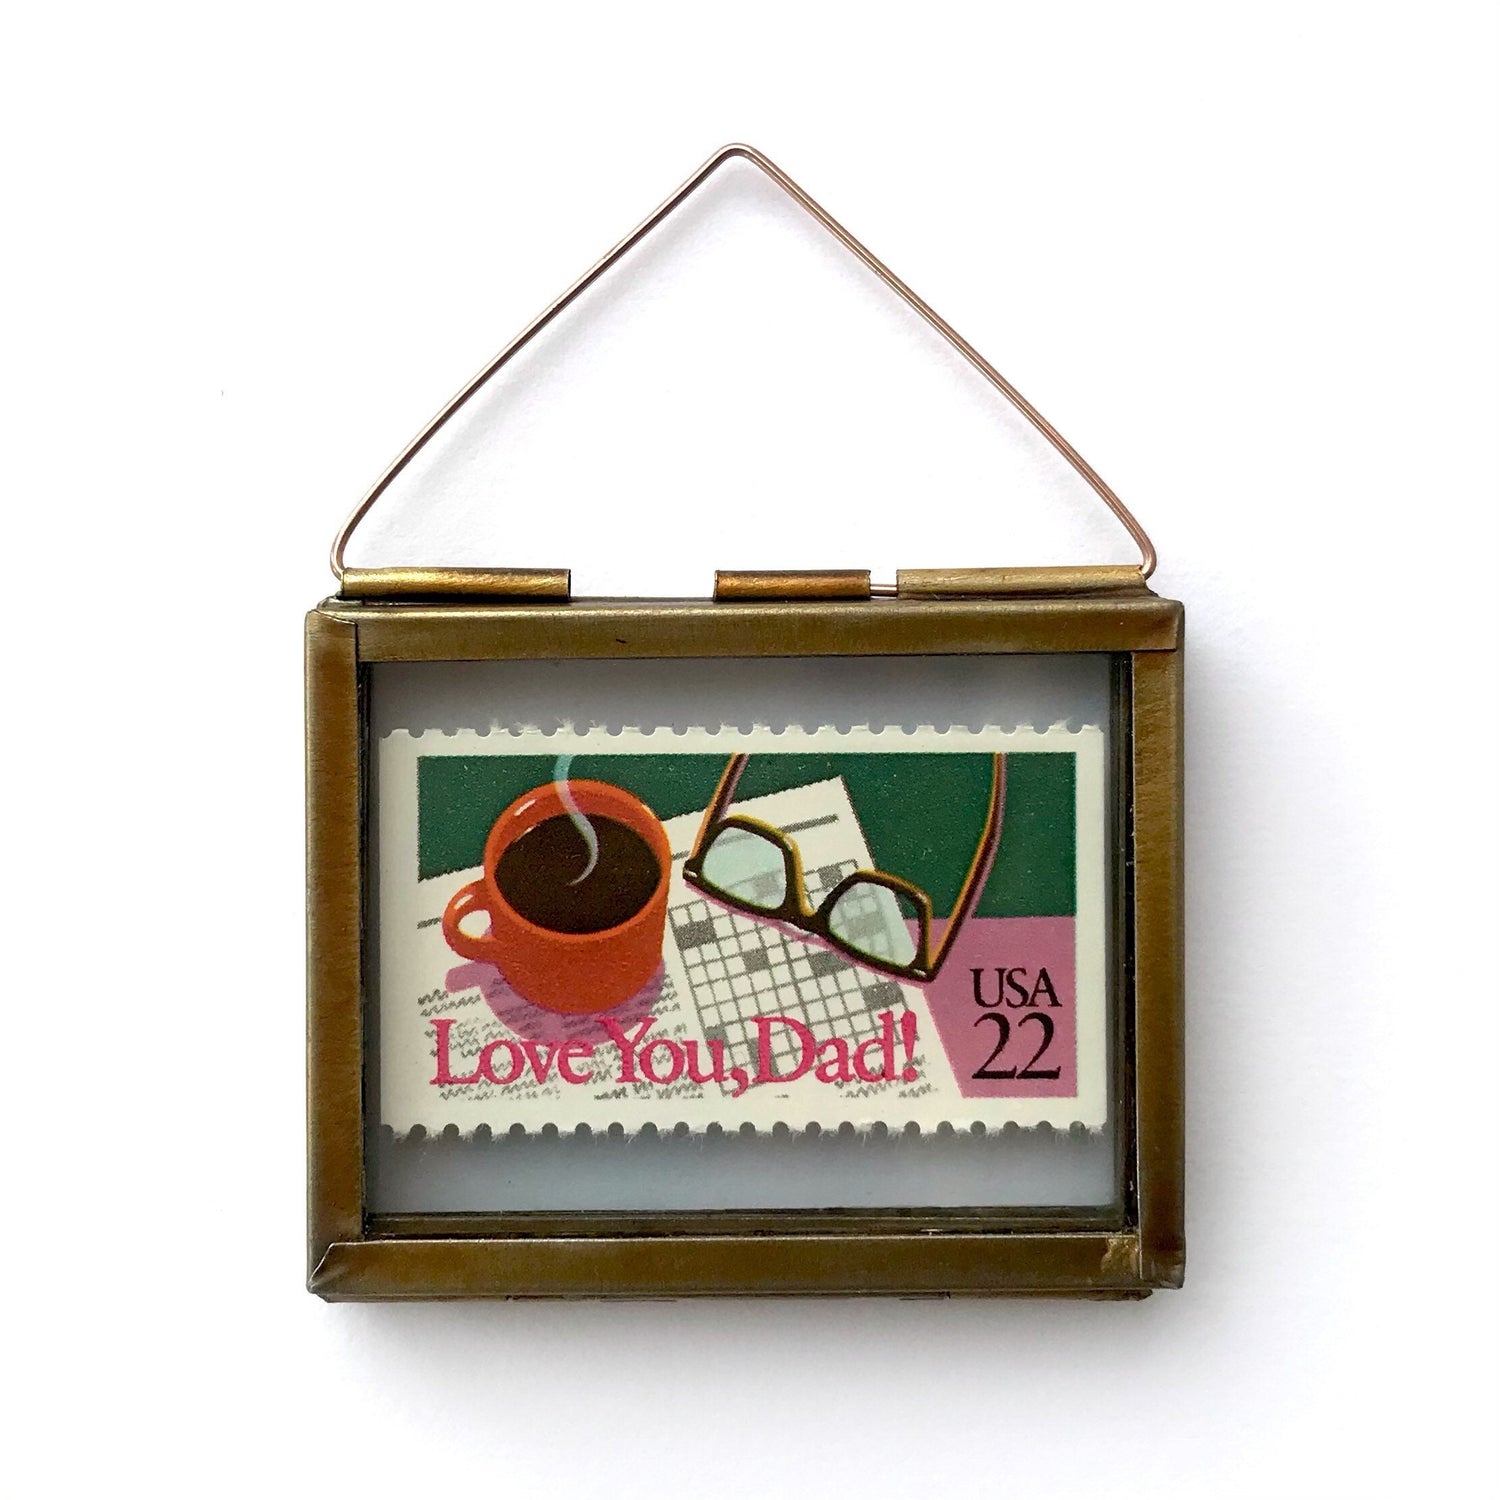 Miniature Frames - For Dad